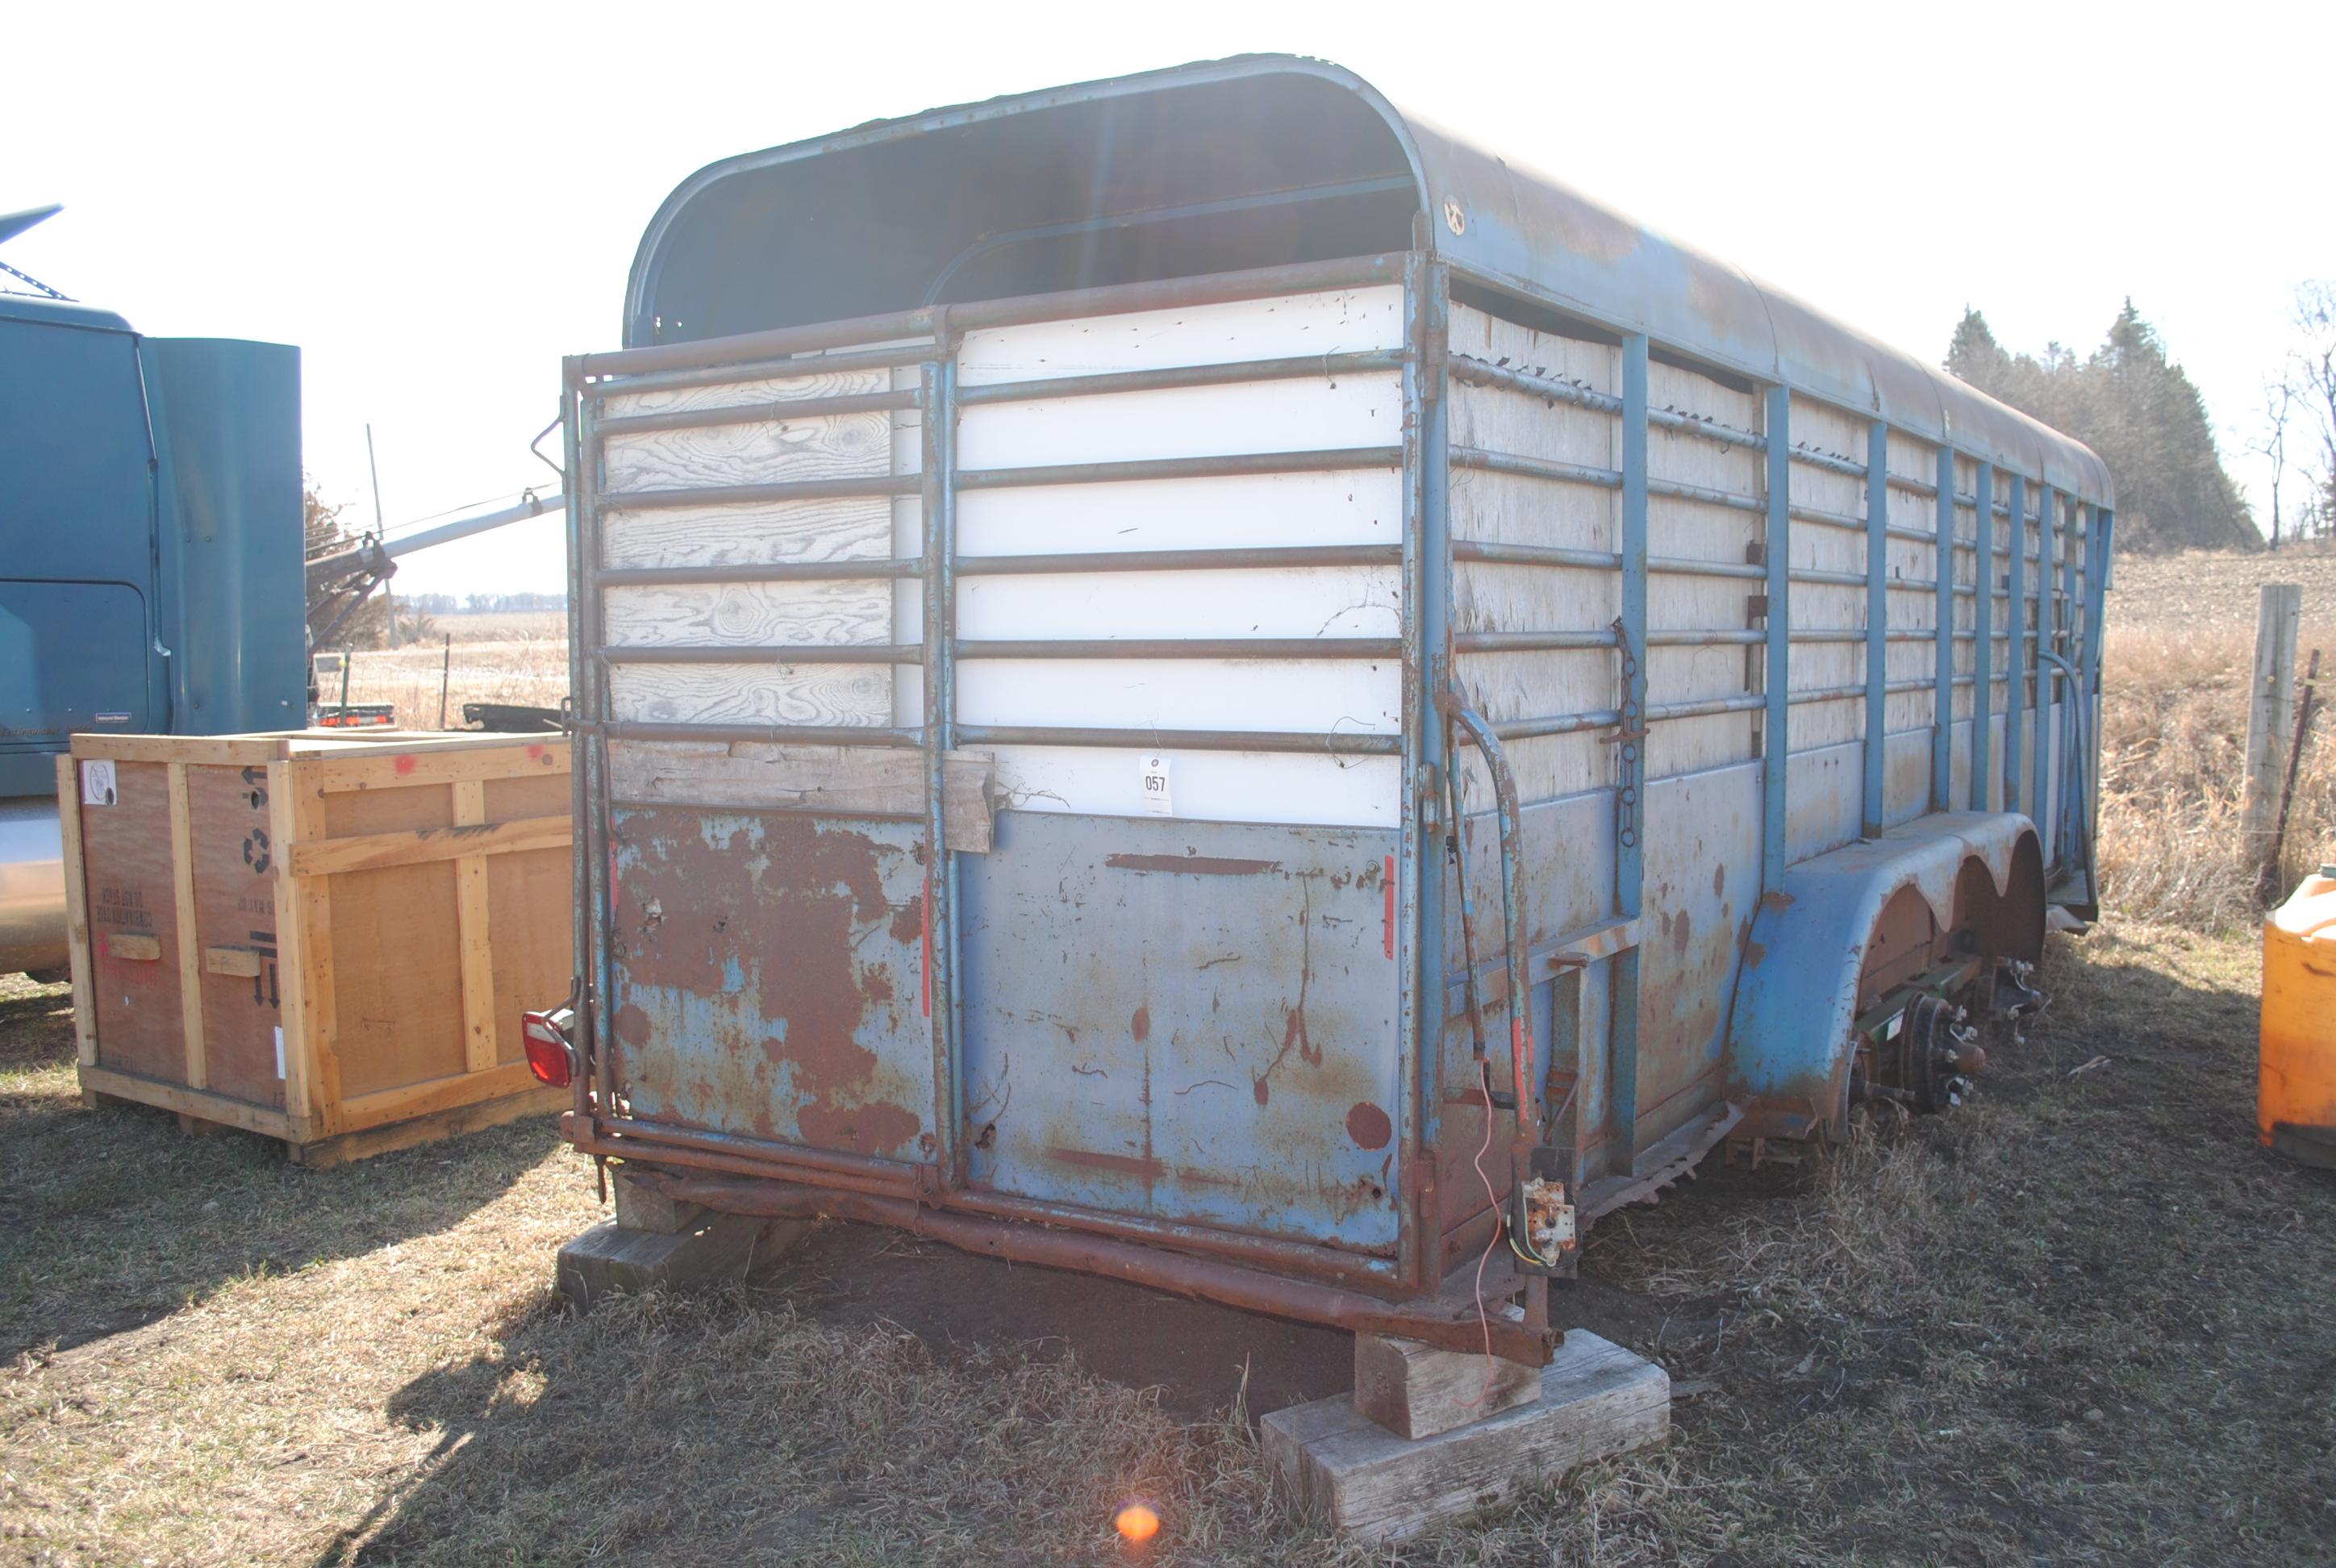 24' Gooseneck Trailer, tri-axle, missing 3 tires on passenger side, NO TITLE - Farm use only! Will h